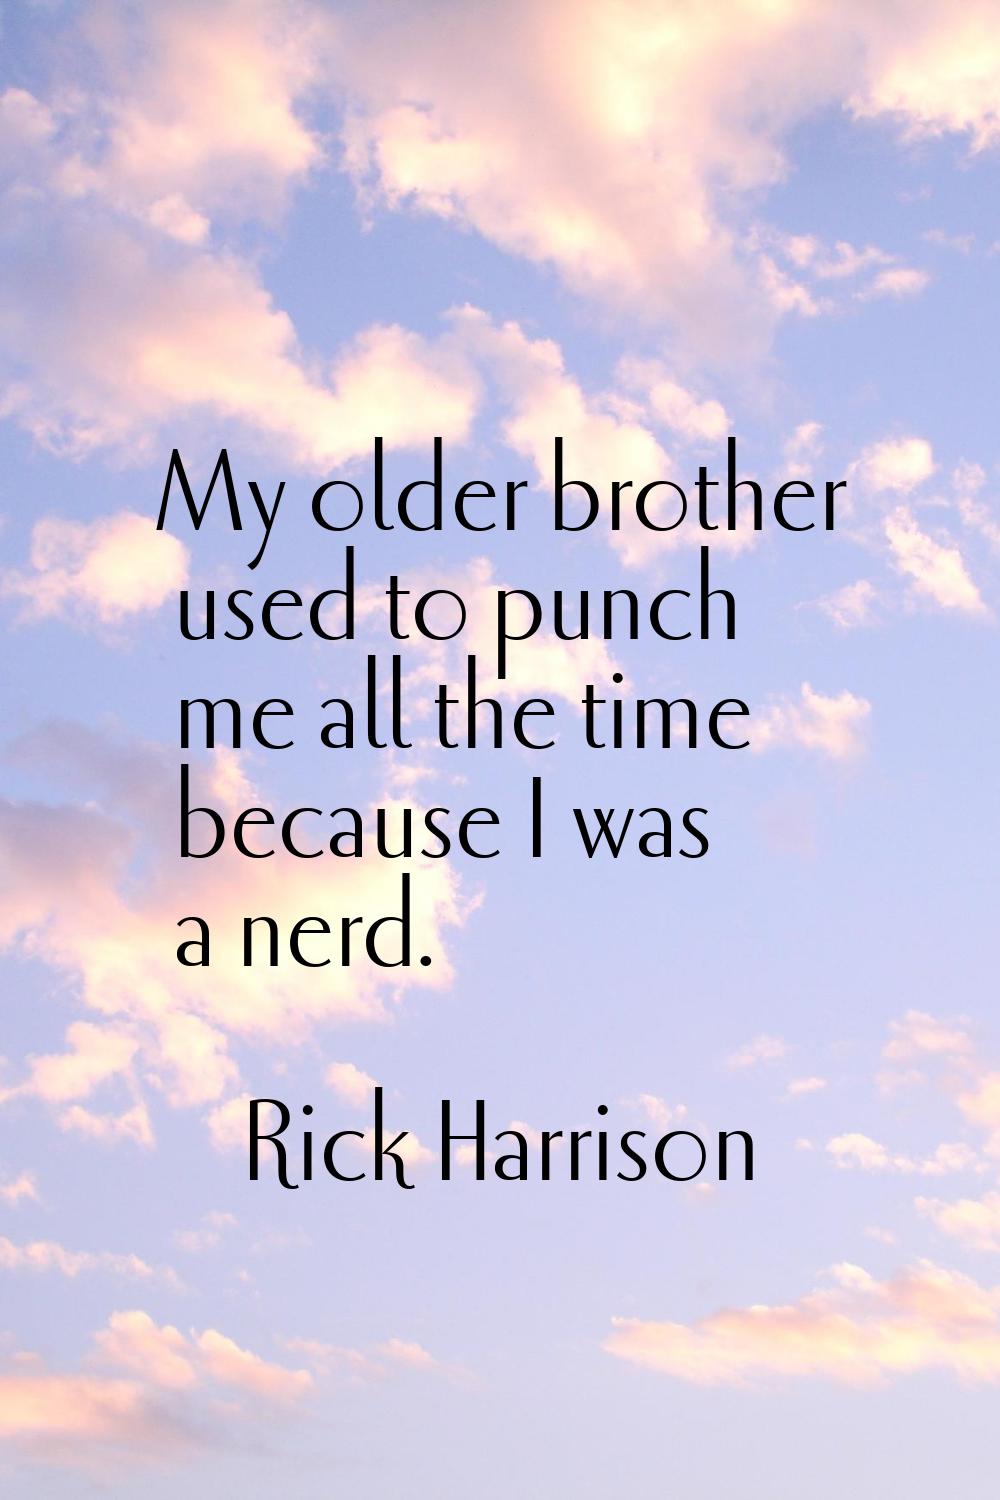 My older brother used to punch me all the time because I was a nerd.